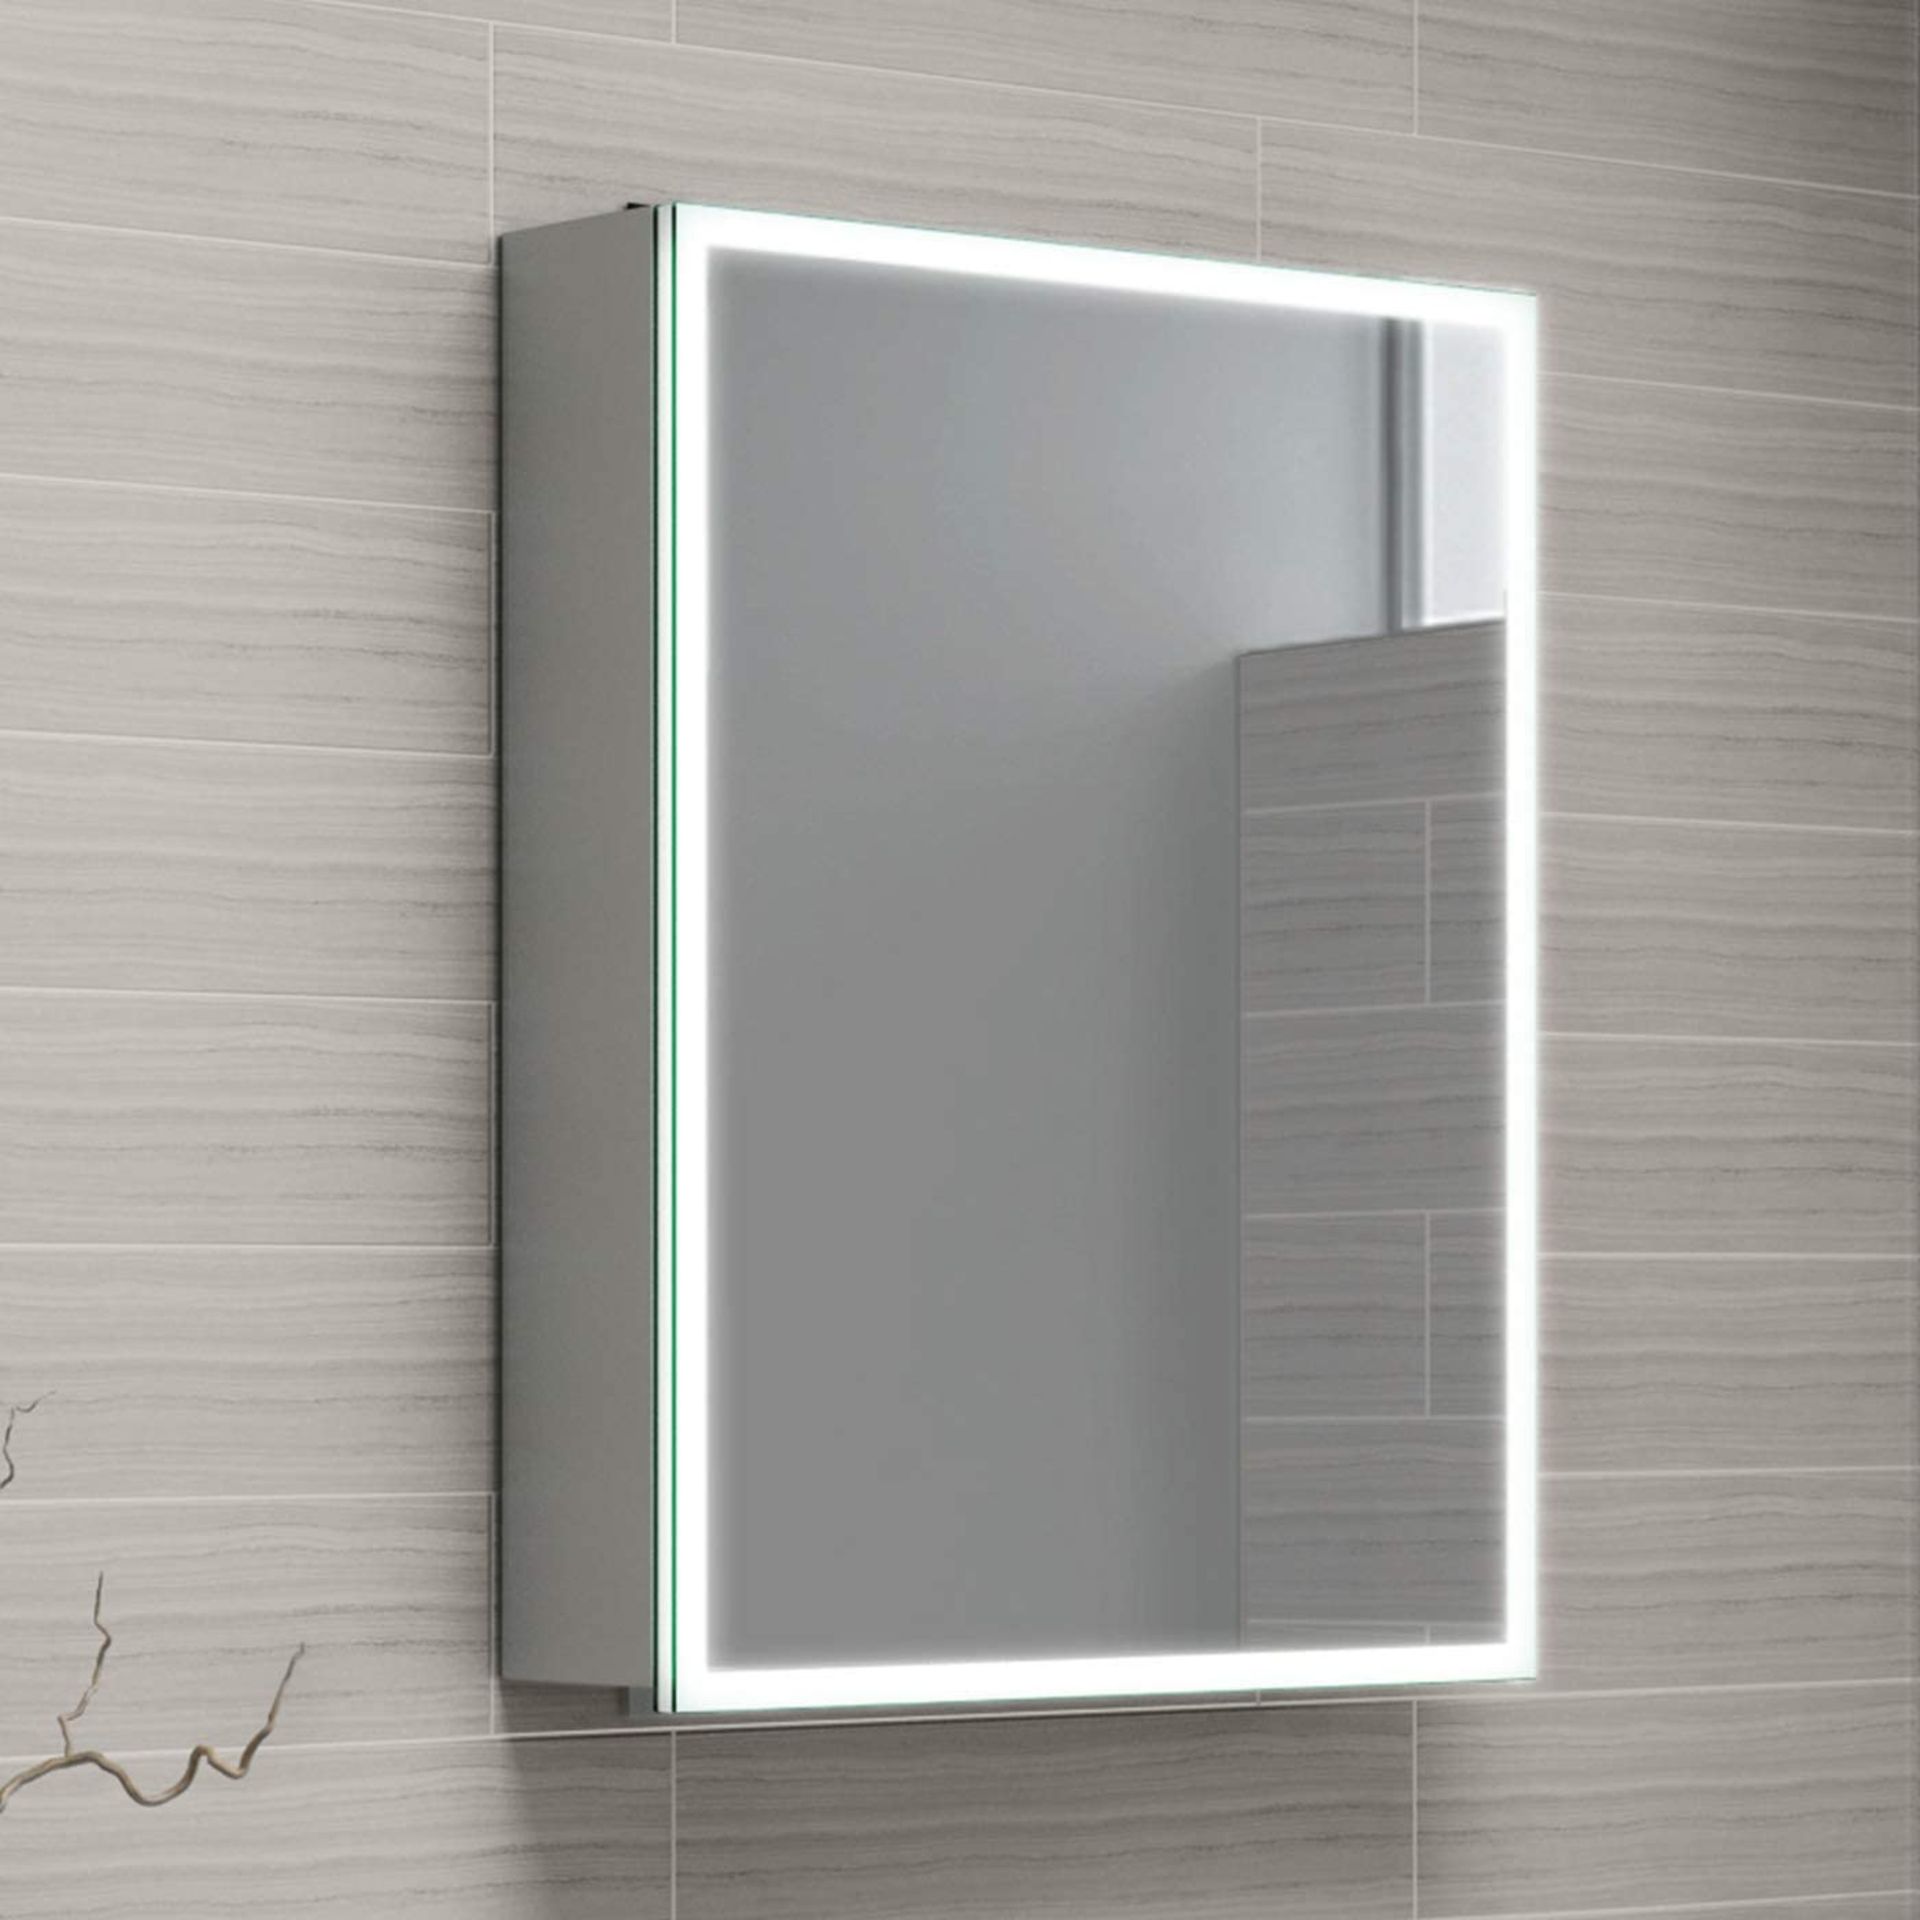 450x600 Cosmic Illuminated LED Mirror Cabinet. RRP £234.99. MC161. We love this mirror cabinet... - Image 3 of 3